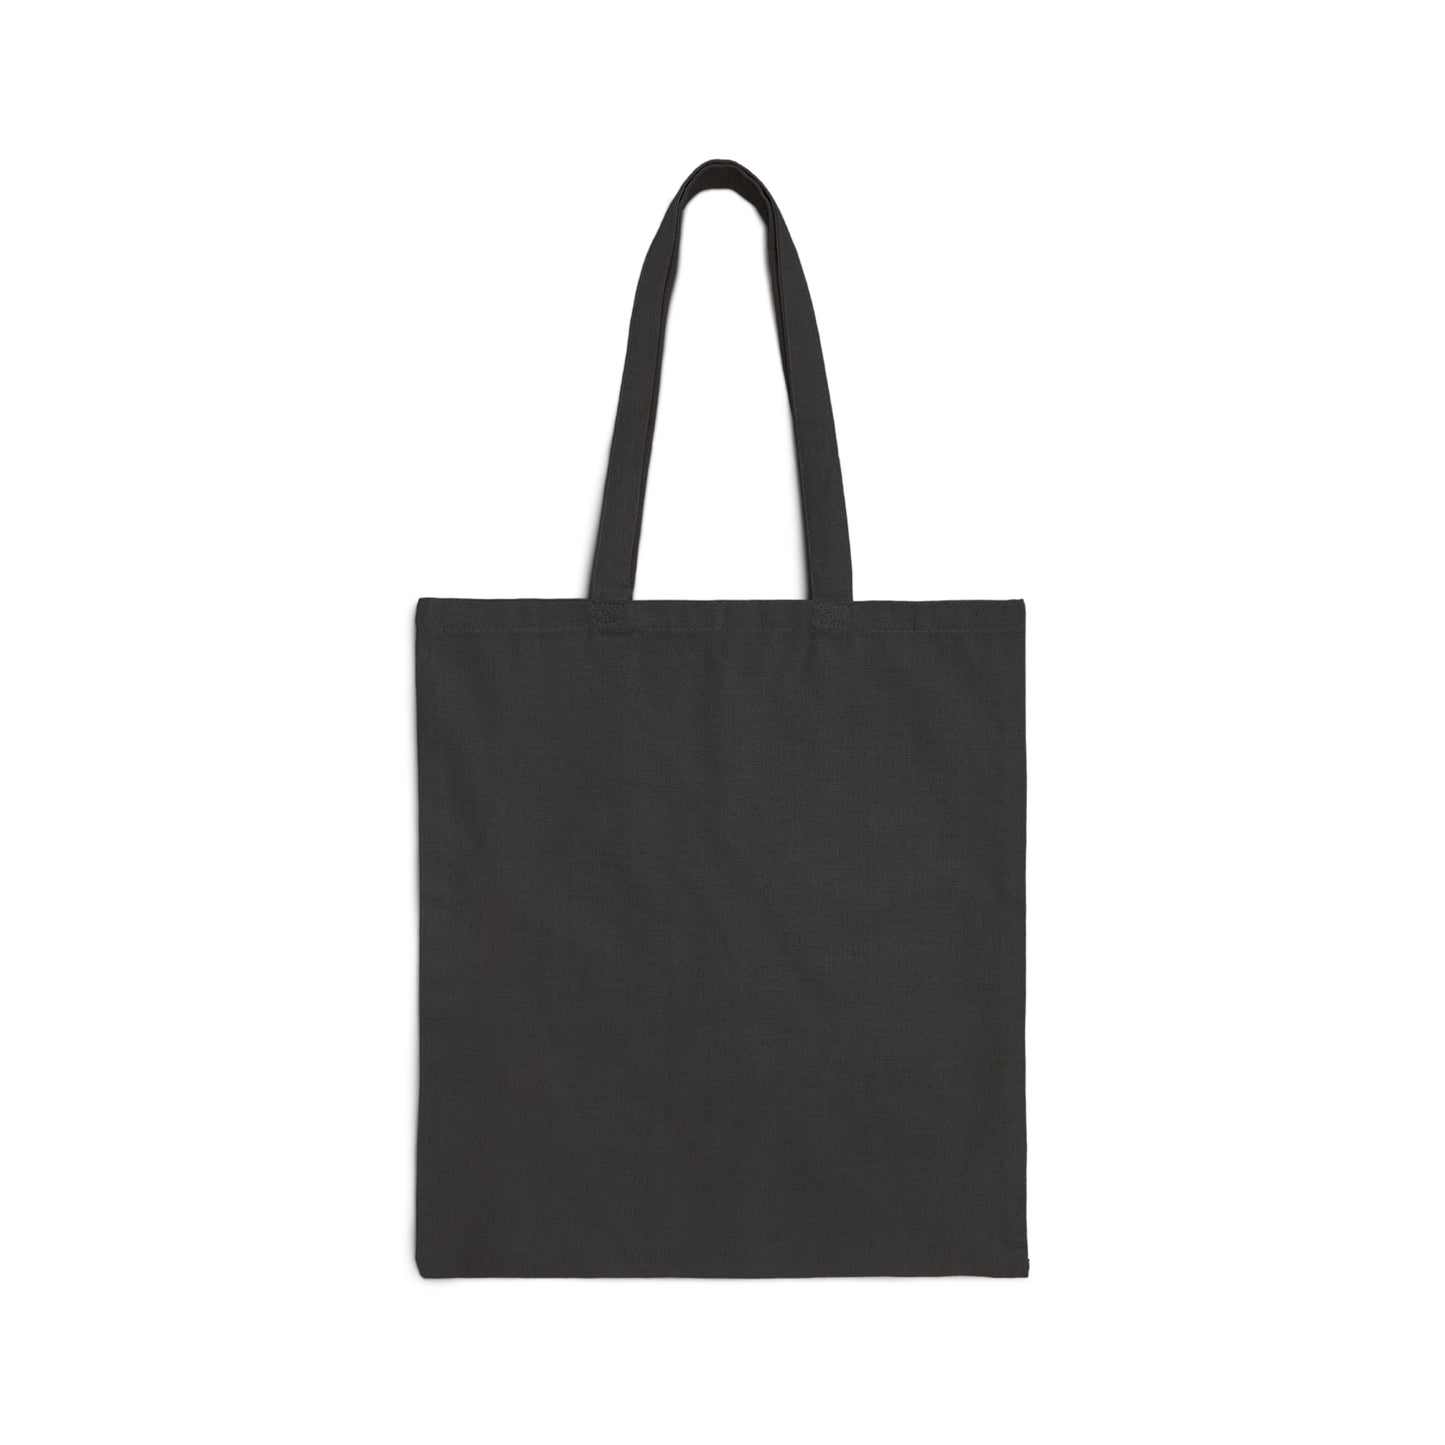 Stay Twisted Tote Bag